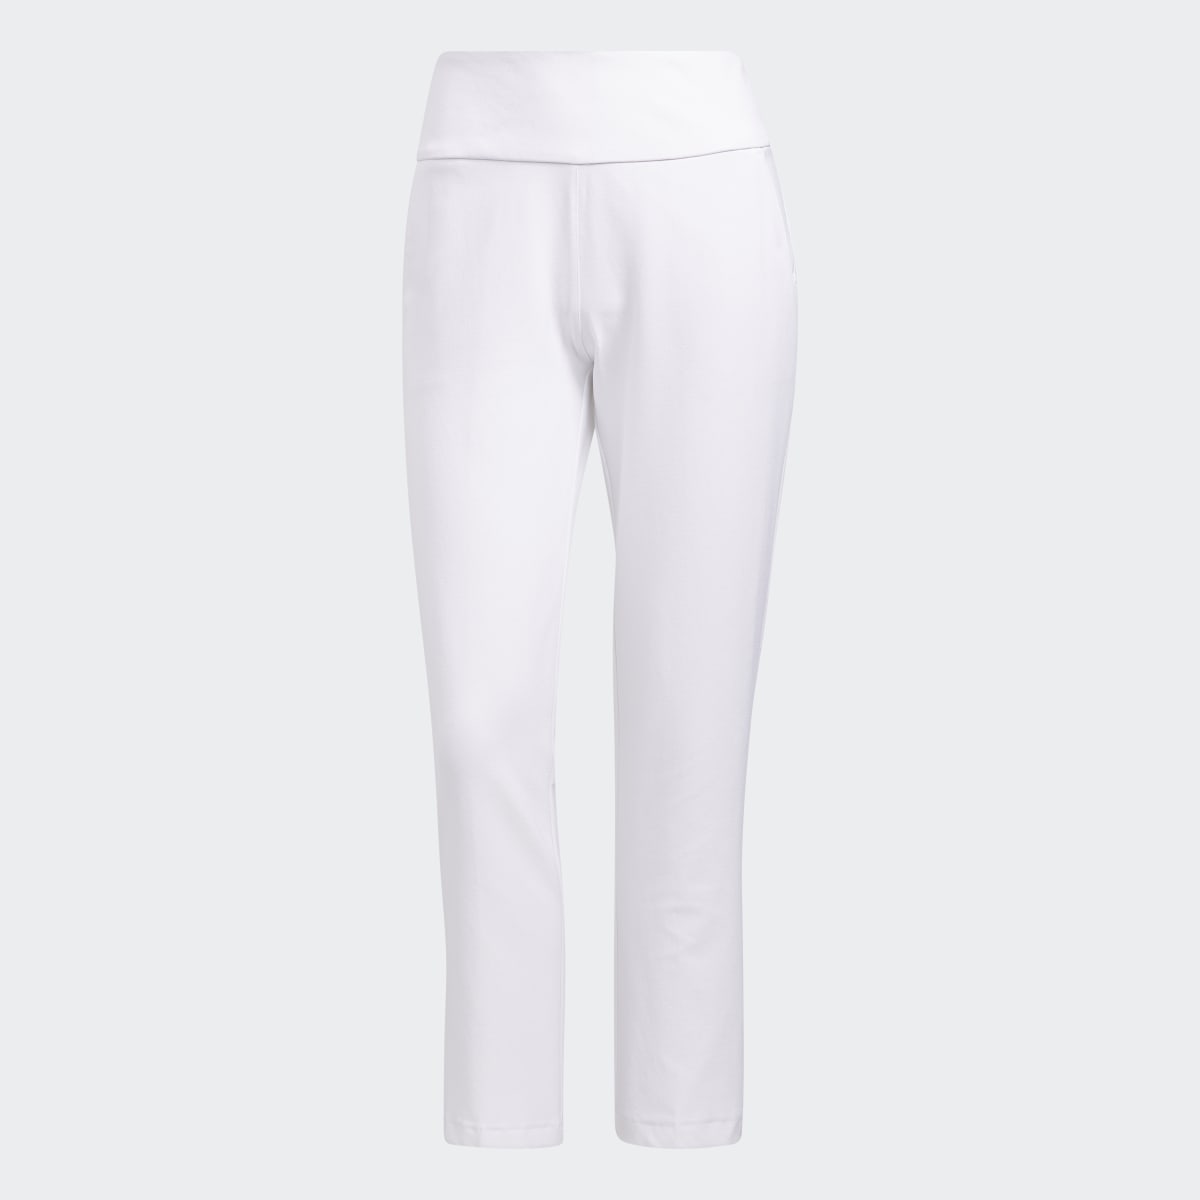 Adidas Pull-On Ankle Pull-On Ankle Golf Pants. 4